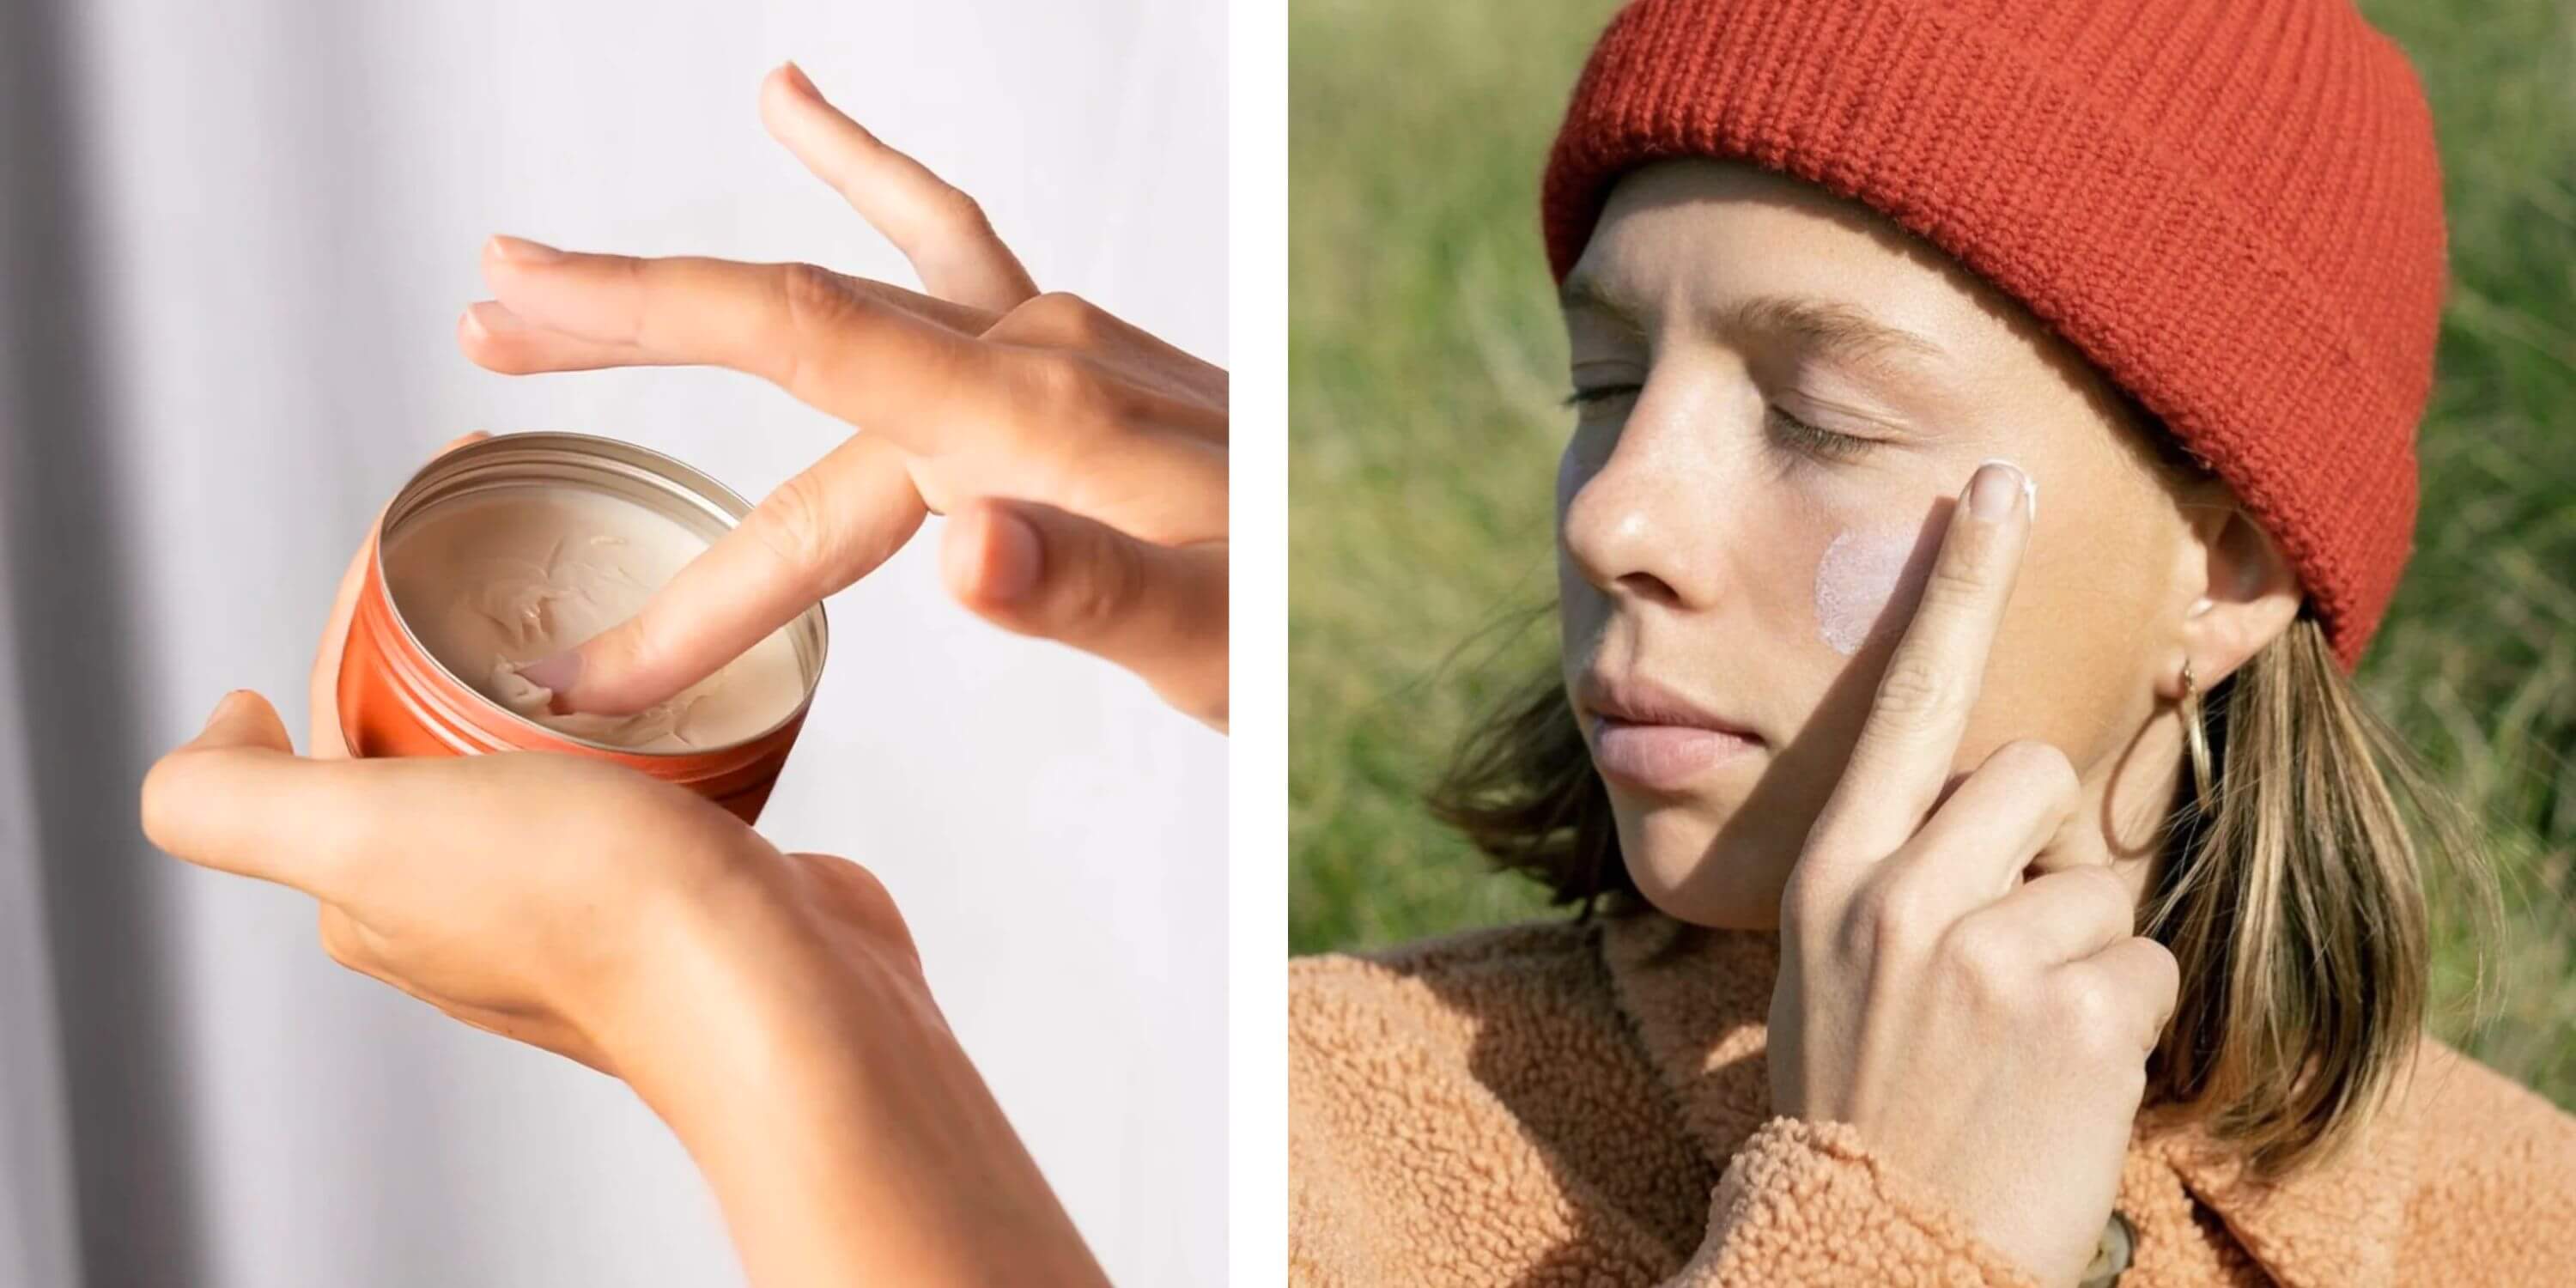 6 Best Sustainable and Natural Sunscreens